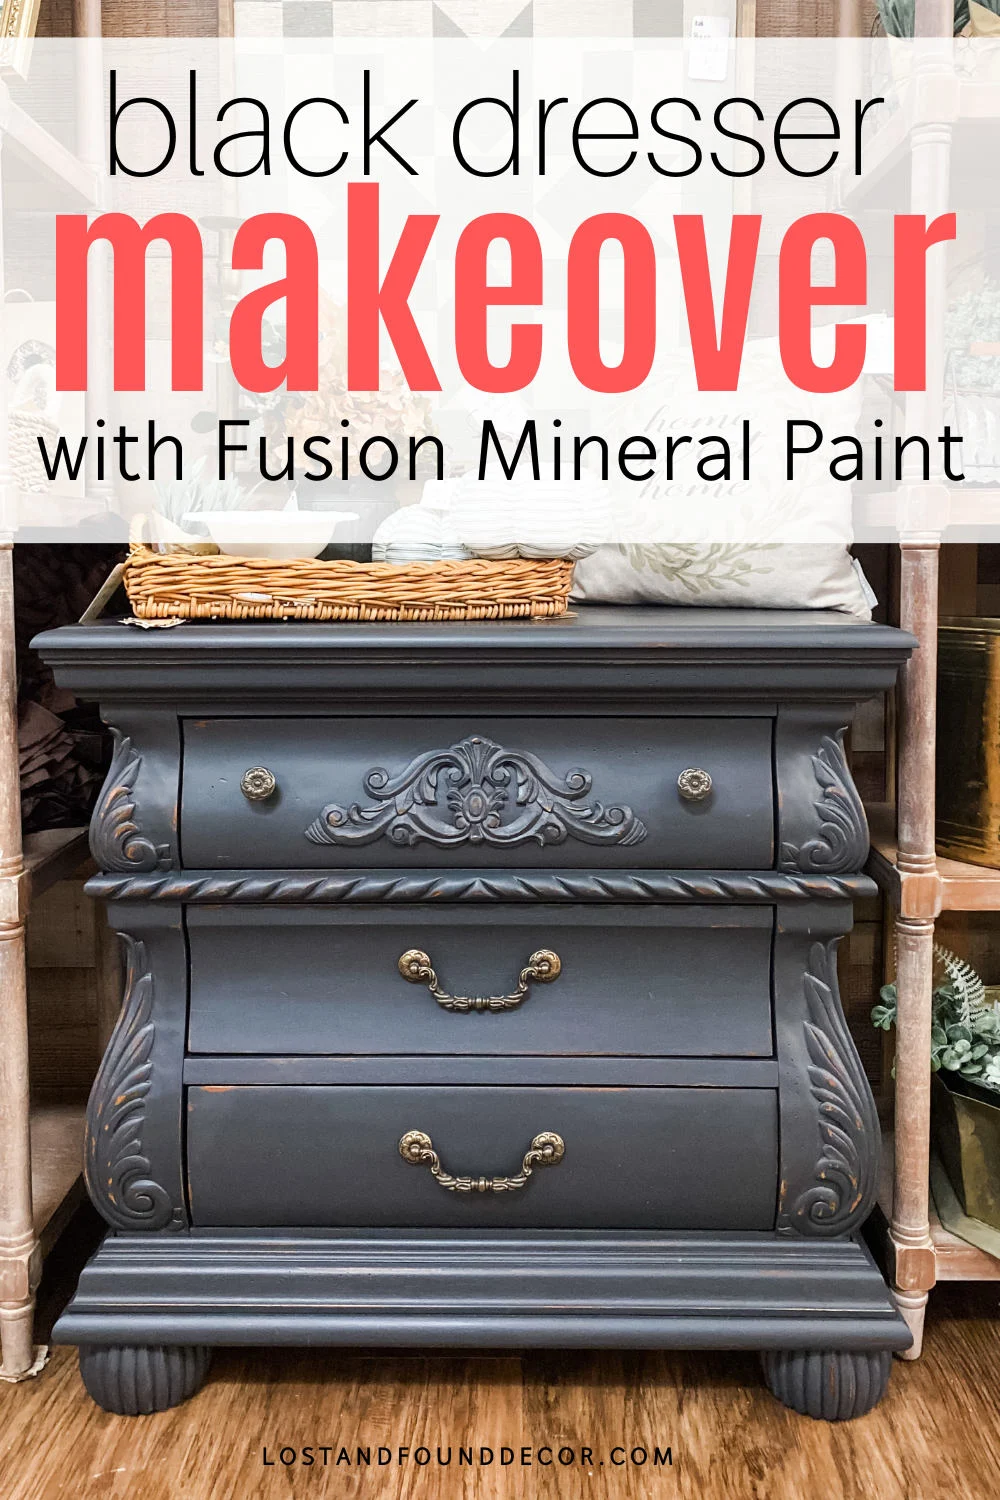 Black Dresser Makeover with Fusion Mineral Paint - Lost & Found Decor